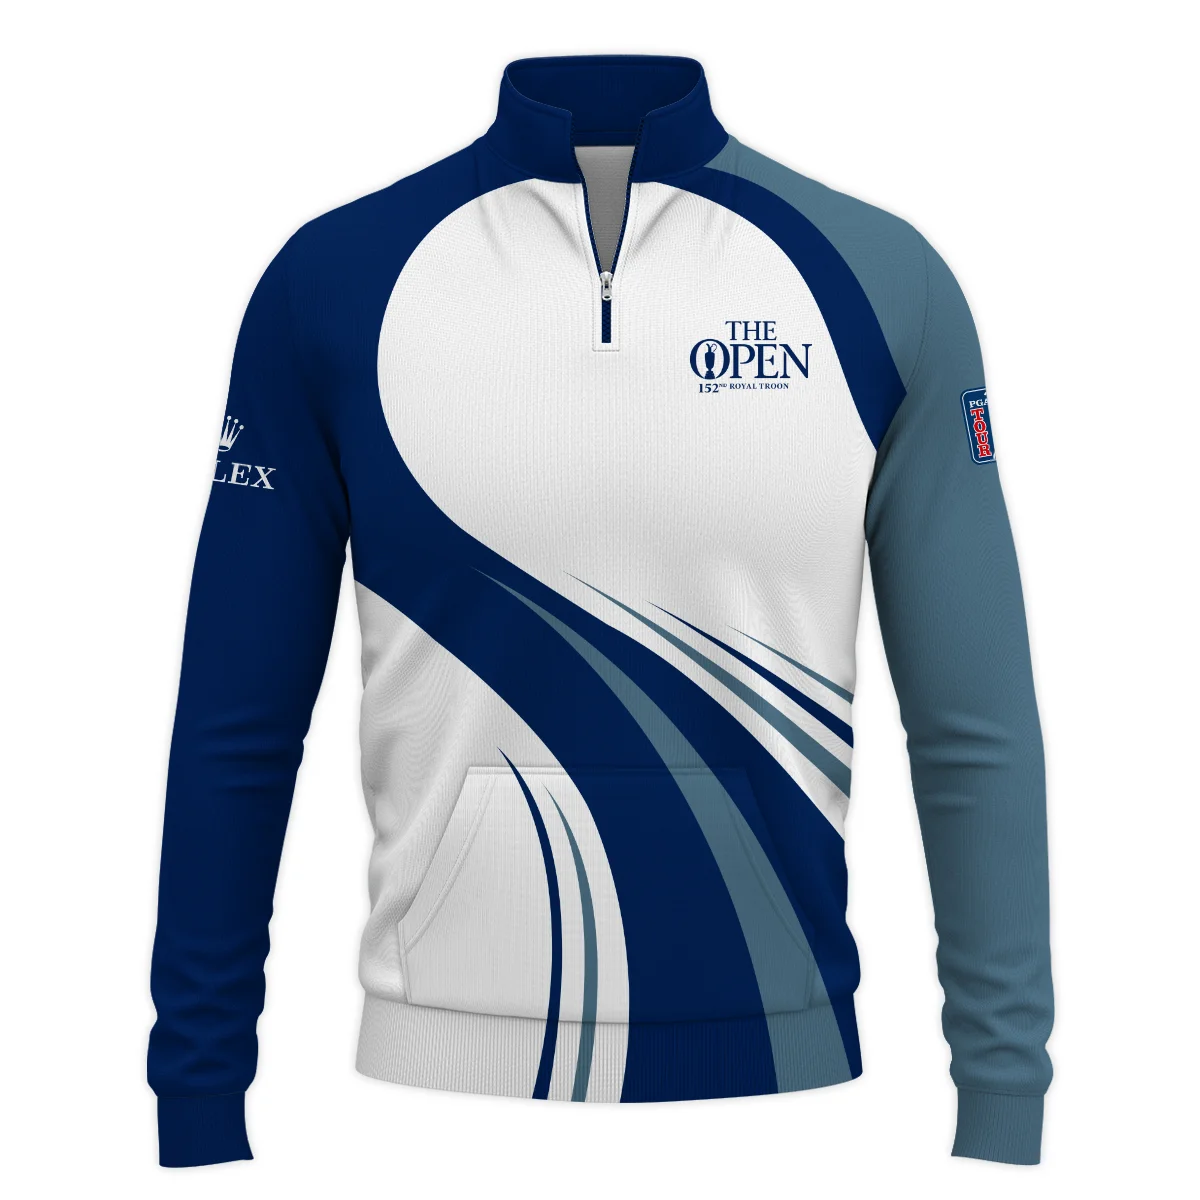 152nd Open Championship Rolex White Mostly Desaturated Dark Blue Zipper Hoodie Shirt All Over Prints HOTOP270624A02ROXZHD